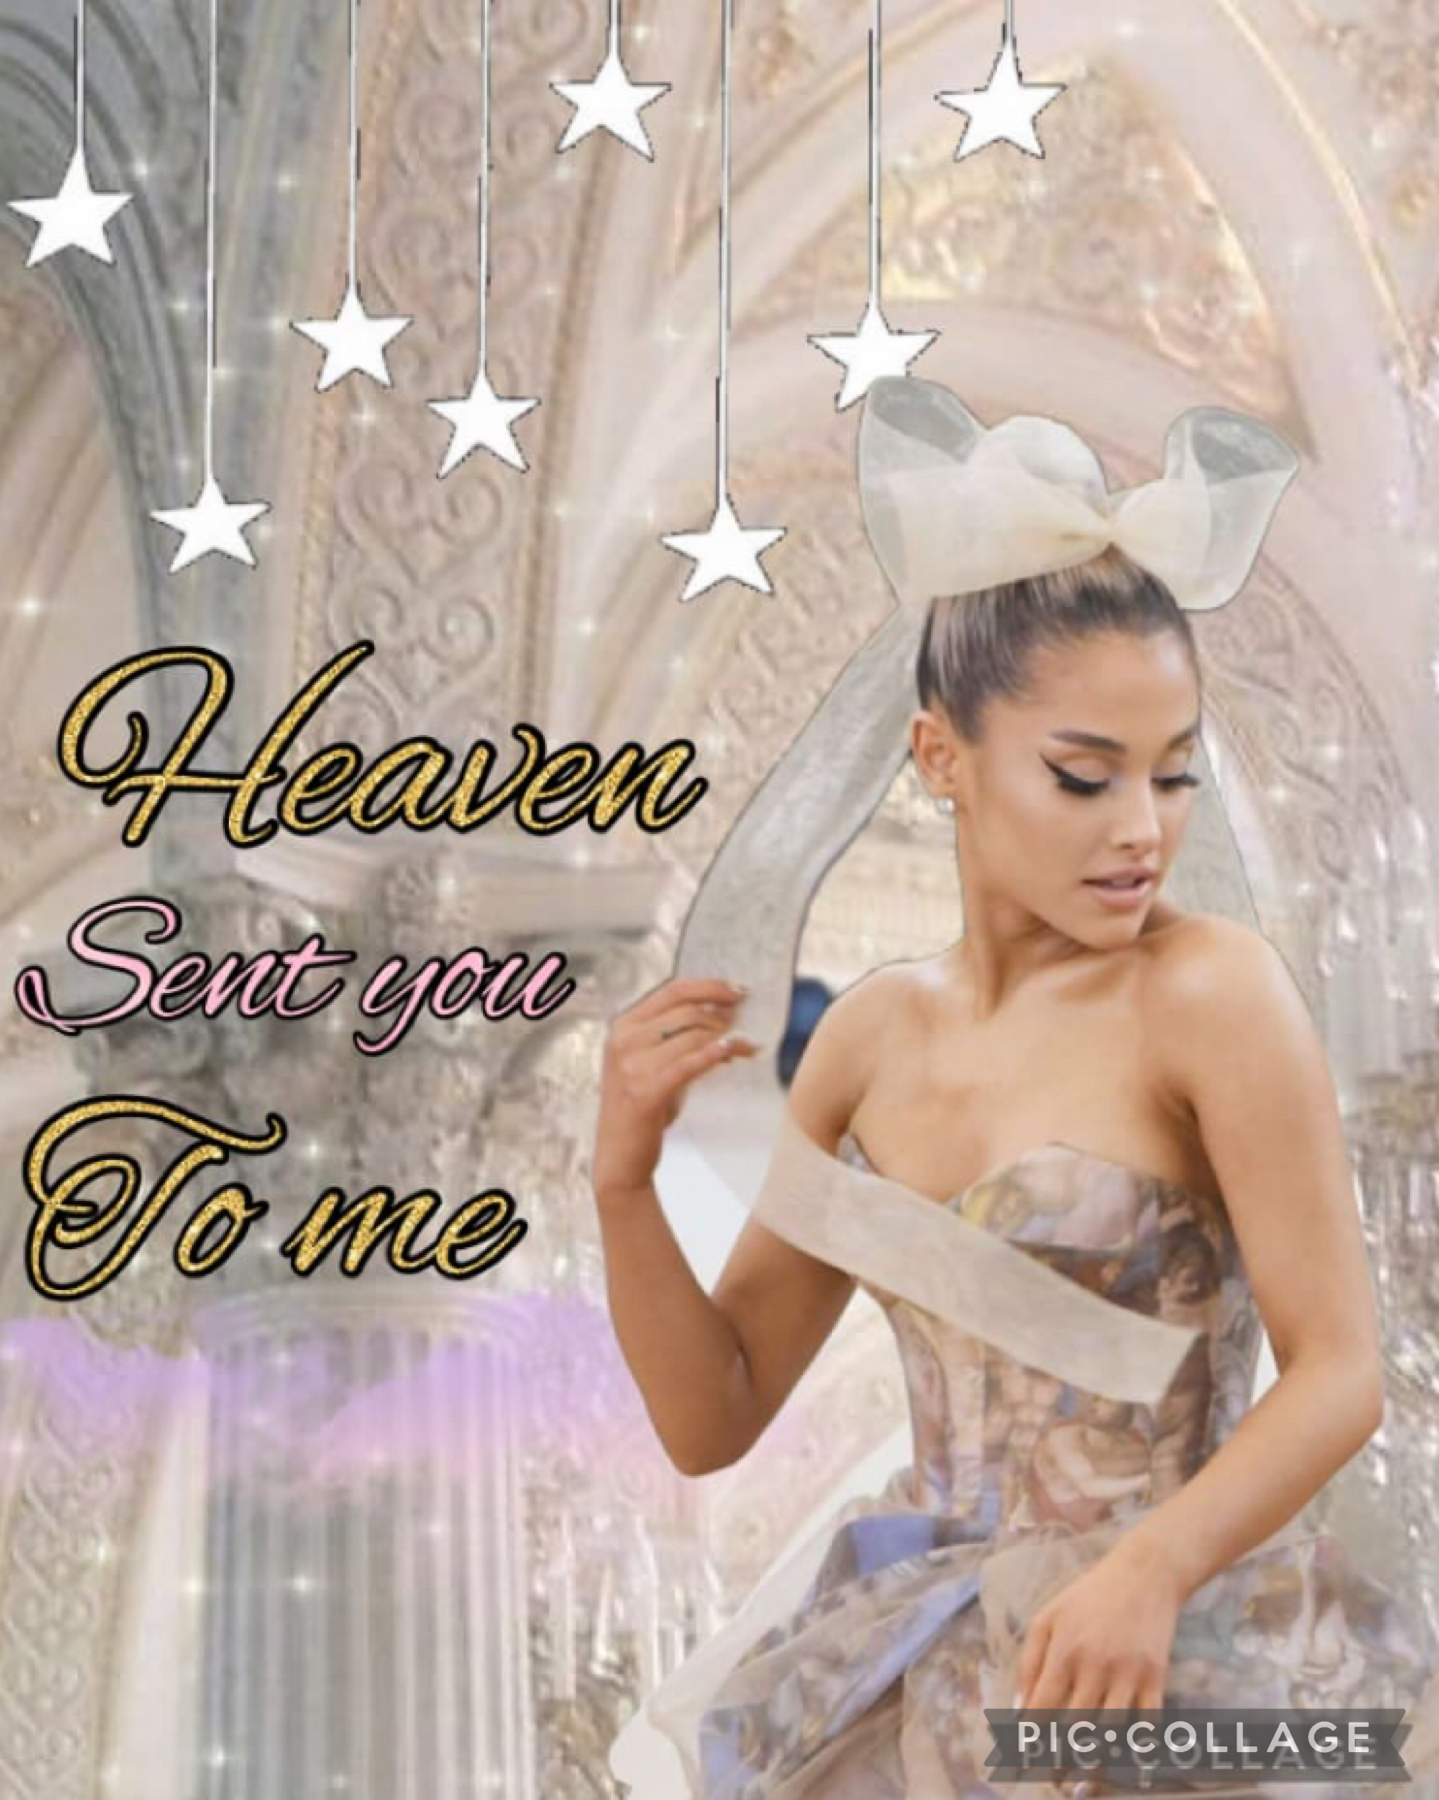 27.9.21 Ariana Grande angel core aesthetic collage and entry to Angels contest 